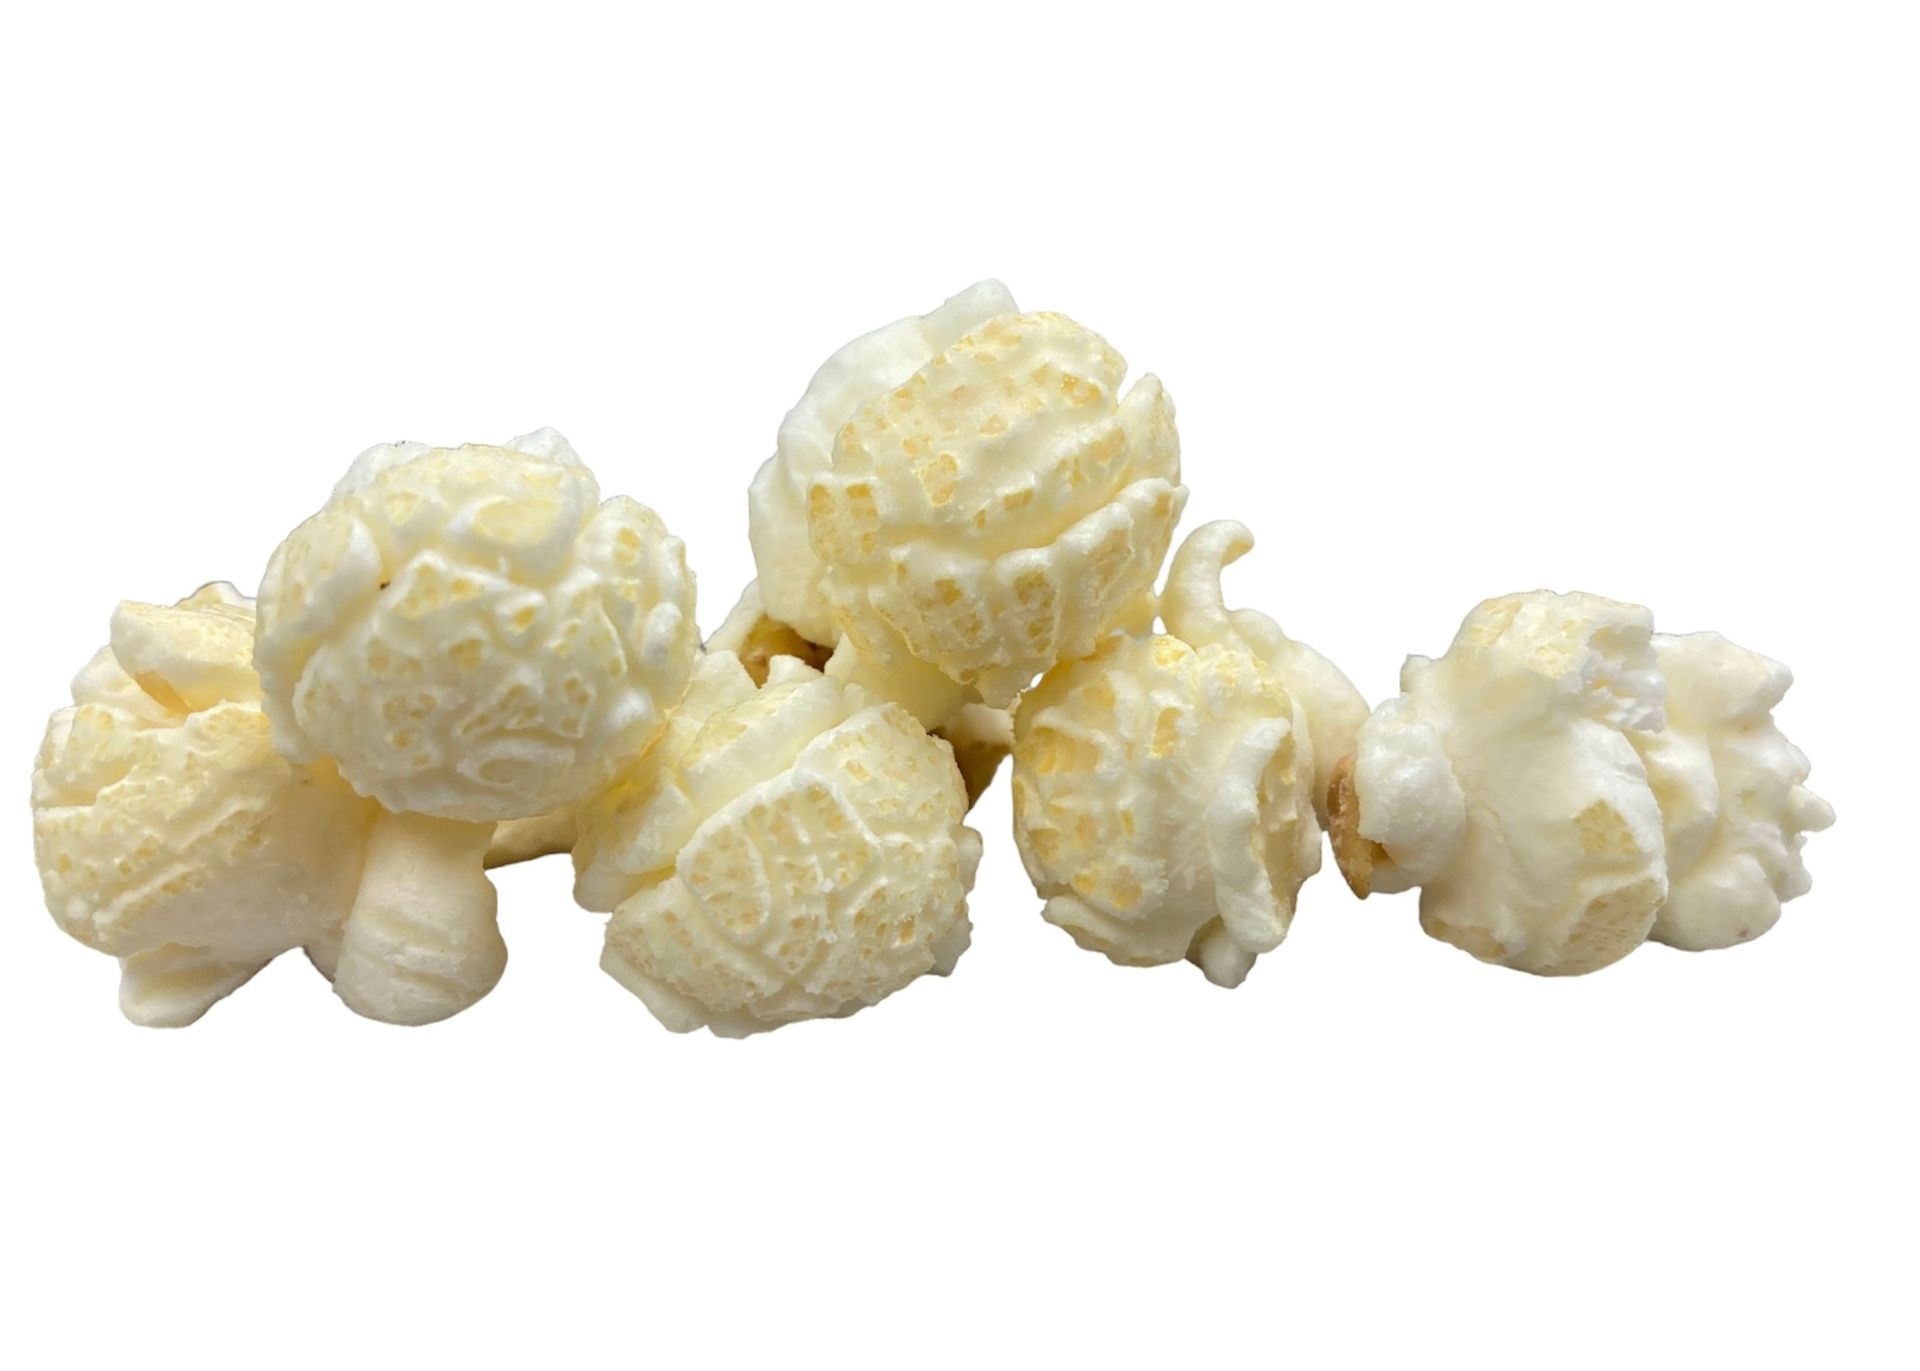 Buttered Popcorn  from Maier's Gourmet Popcorn | Formerly Docs Gourmet Popcorn